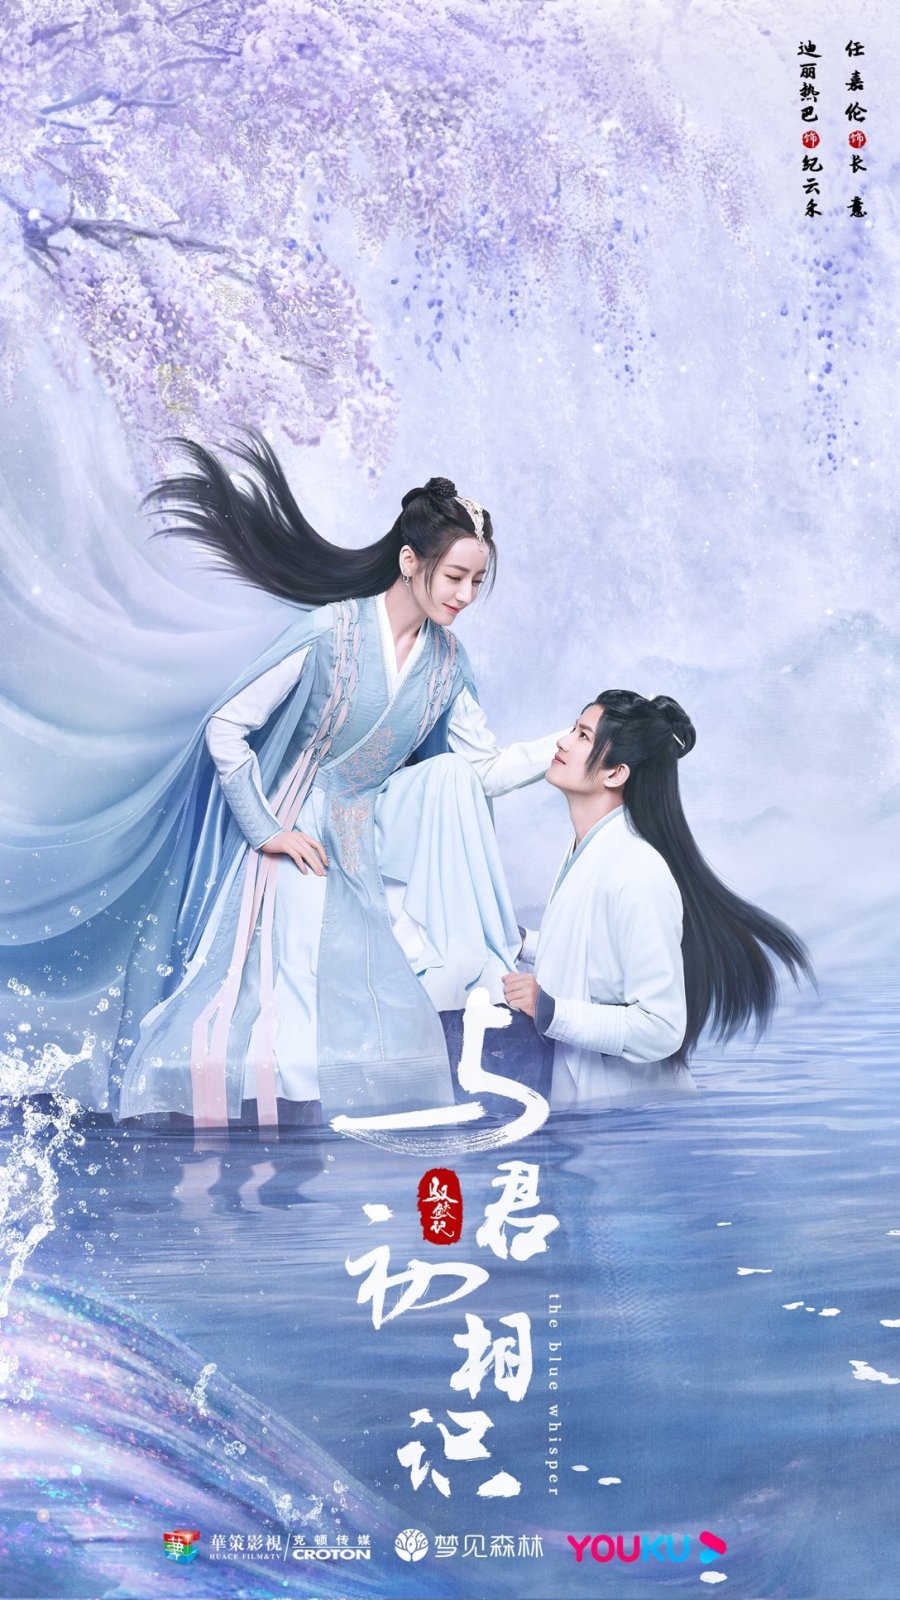 review phim Ngu Giao Ky (The Army / The First Encounter / The Blue Whisper)